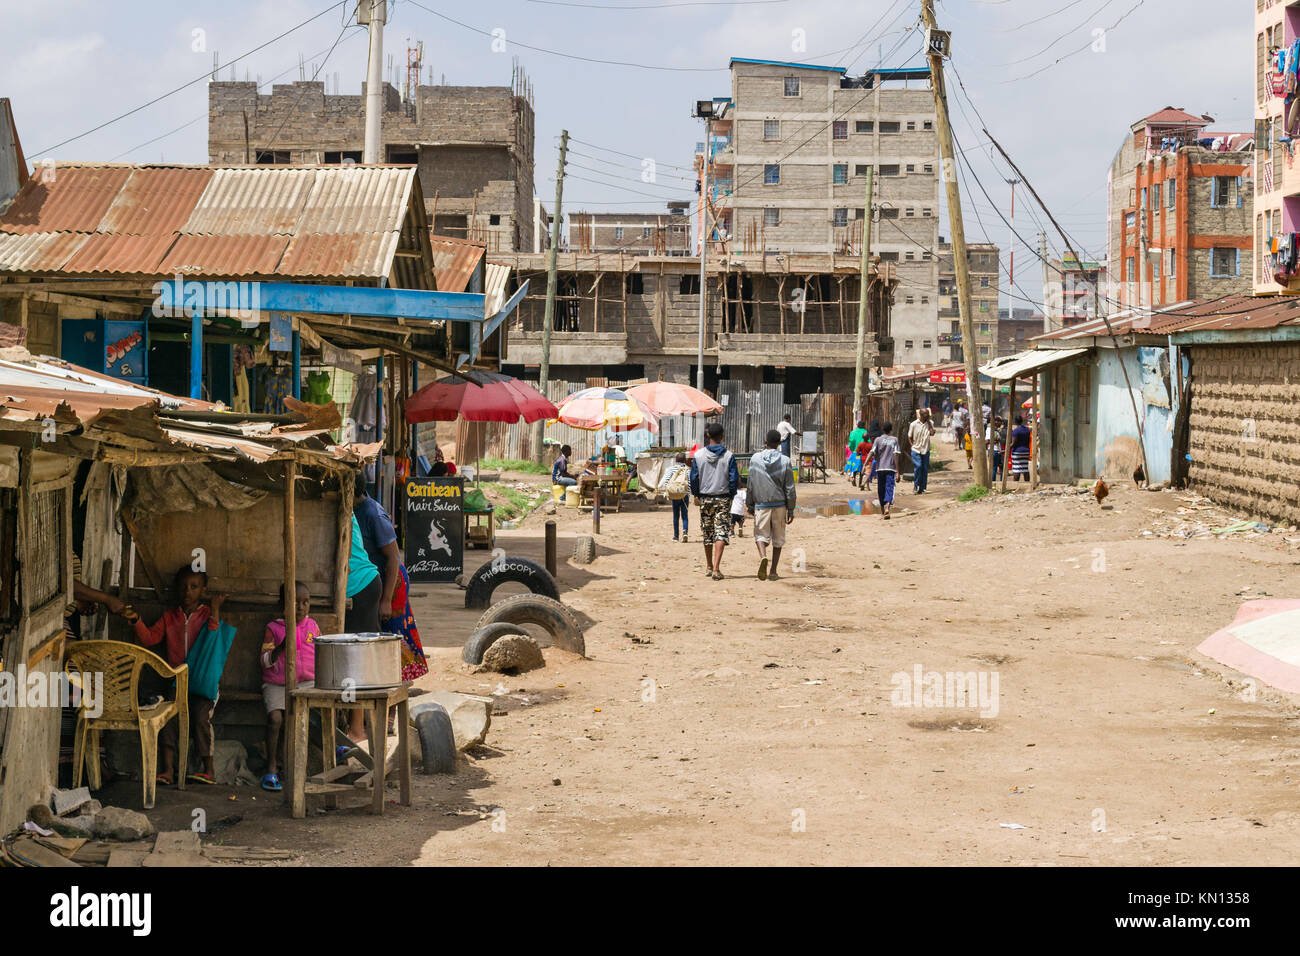 A view of part of the Huruma area of Nairobi with people going about daily life, Nairobi, Kenya, East Africa Stock Photo